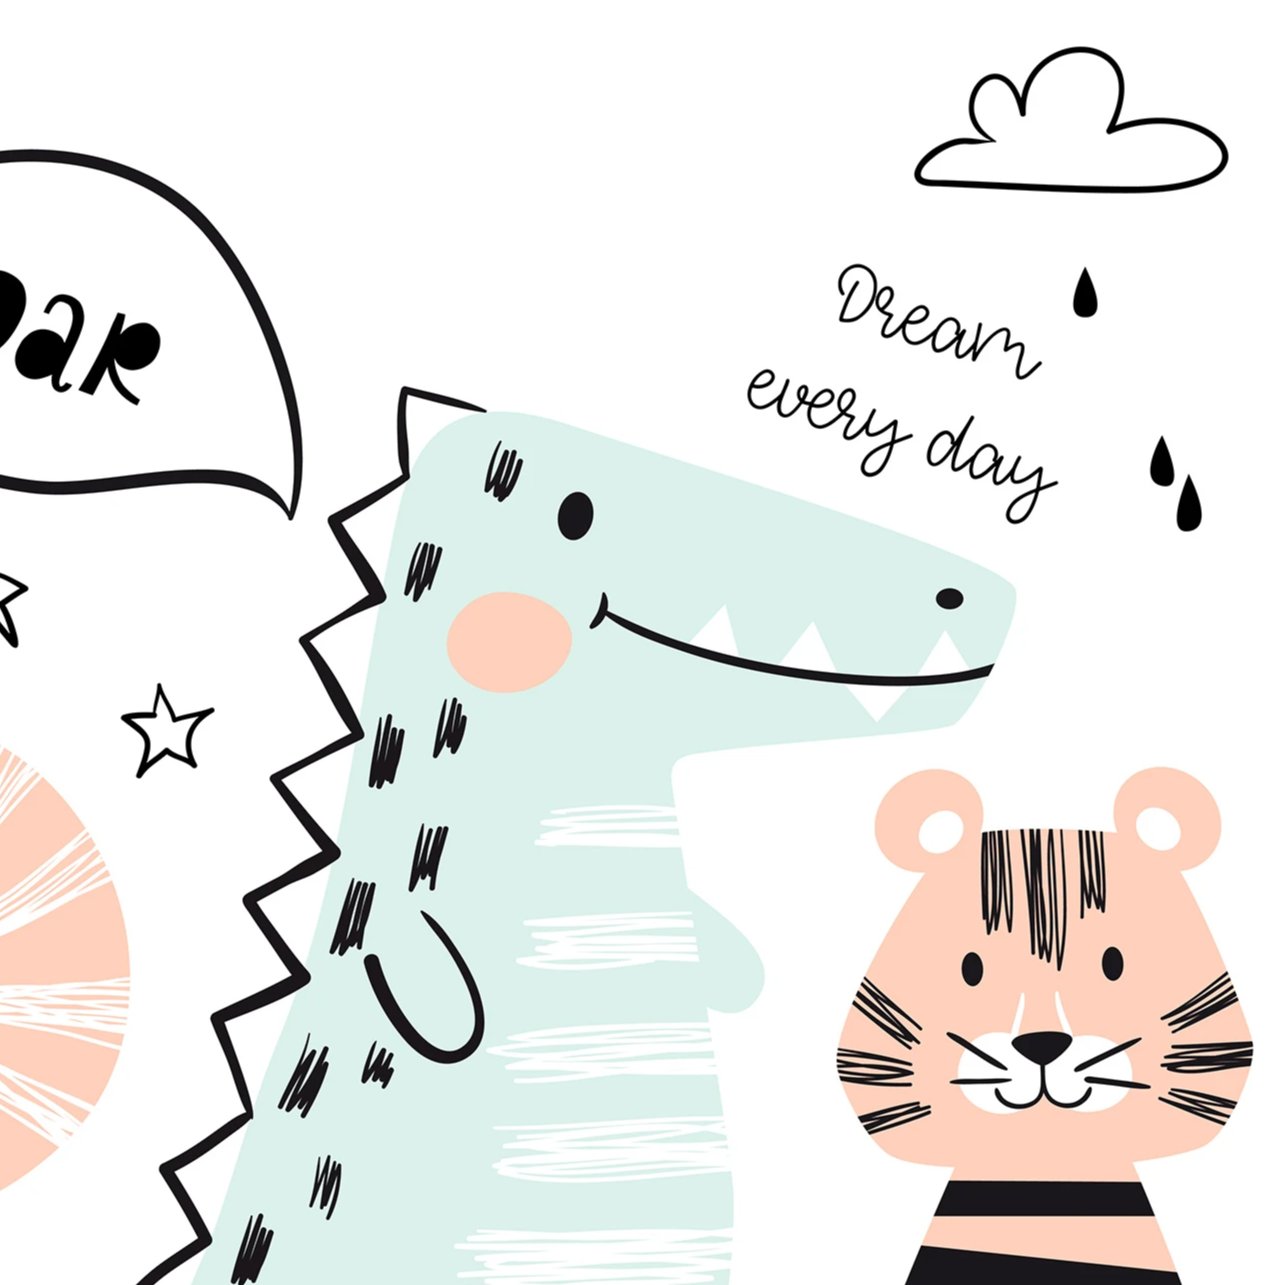 A close-up of the Kids Wallpaper - Animal Mural II showcasing a portion of the playful design with a teal crocodile and a pink-cheeked tiger. Phrases like 'Dream every day' add a whimsical and inspiring touch to the fun and friendly animal characters.